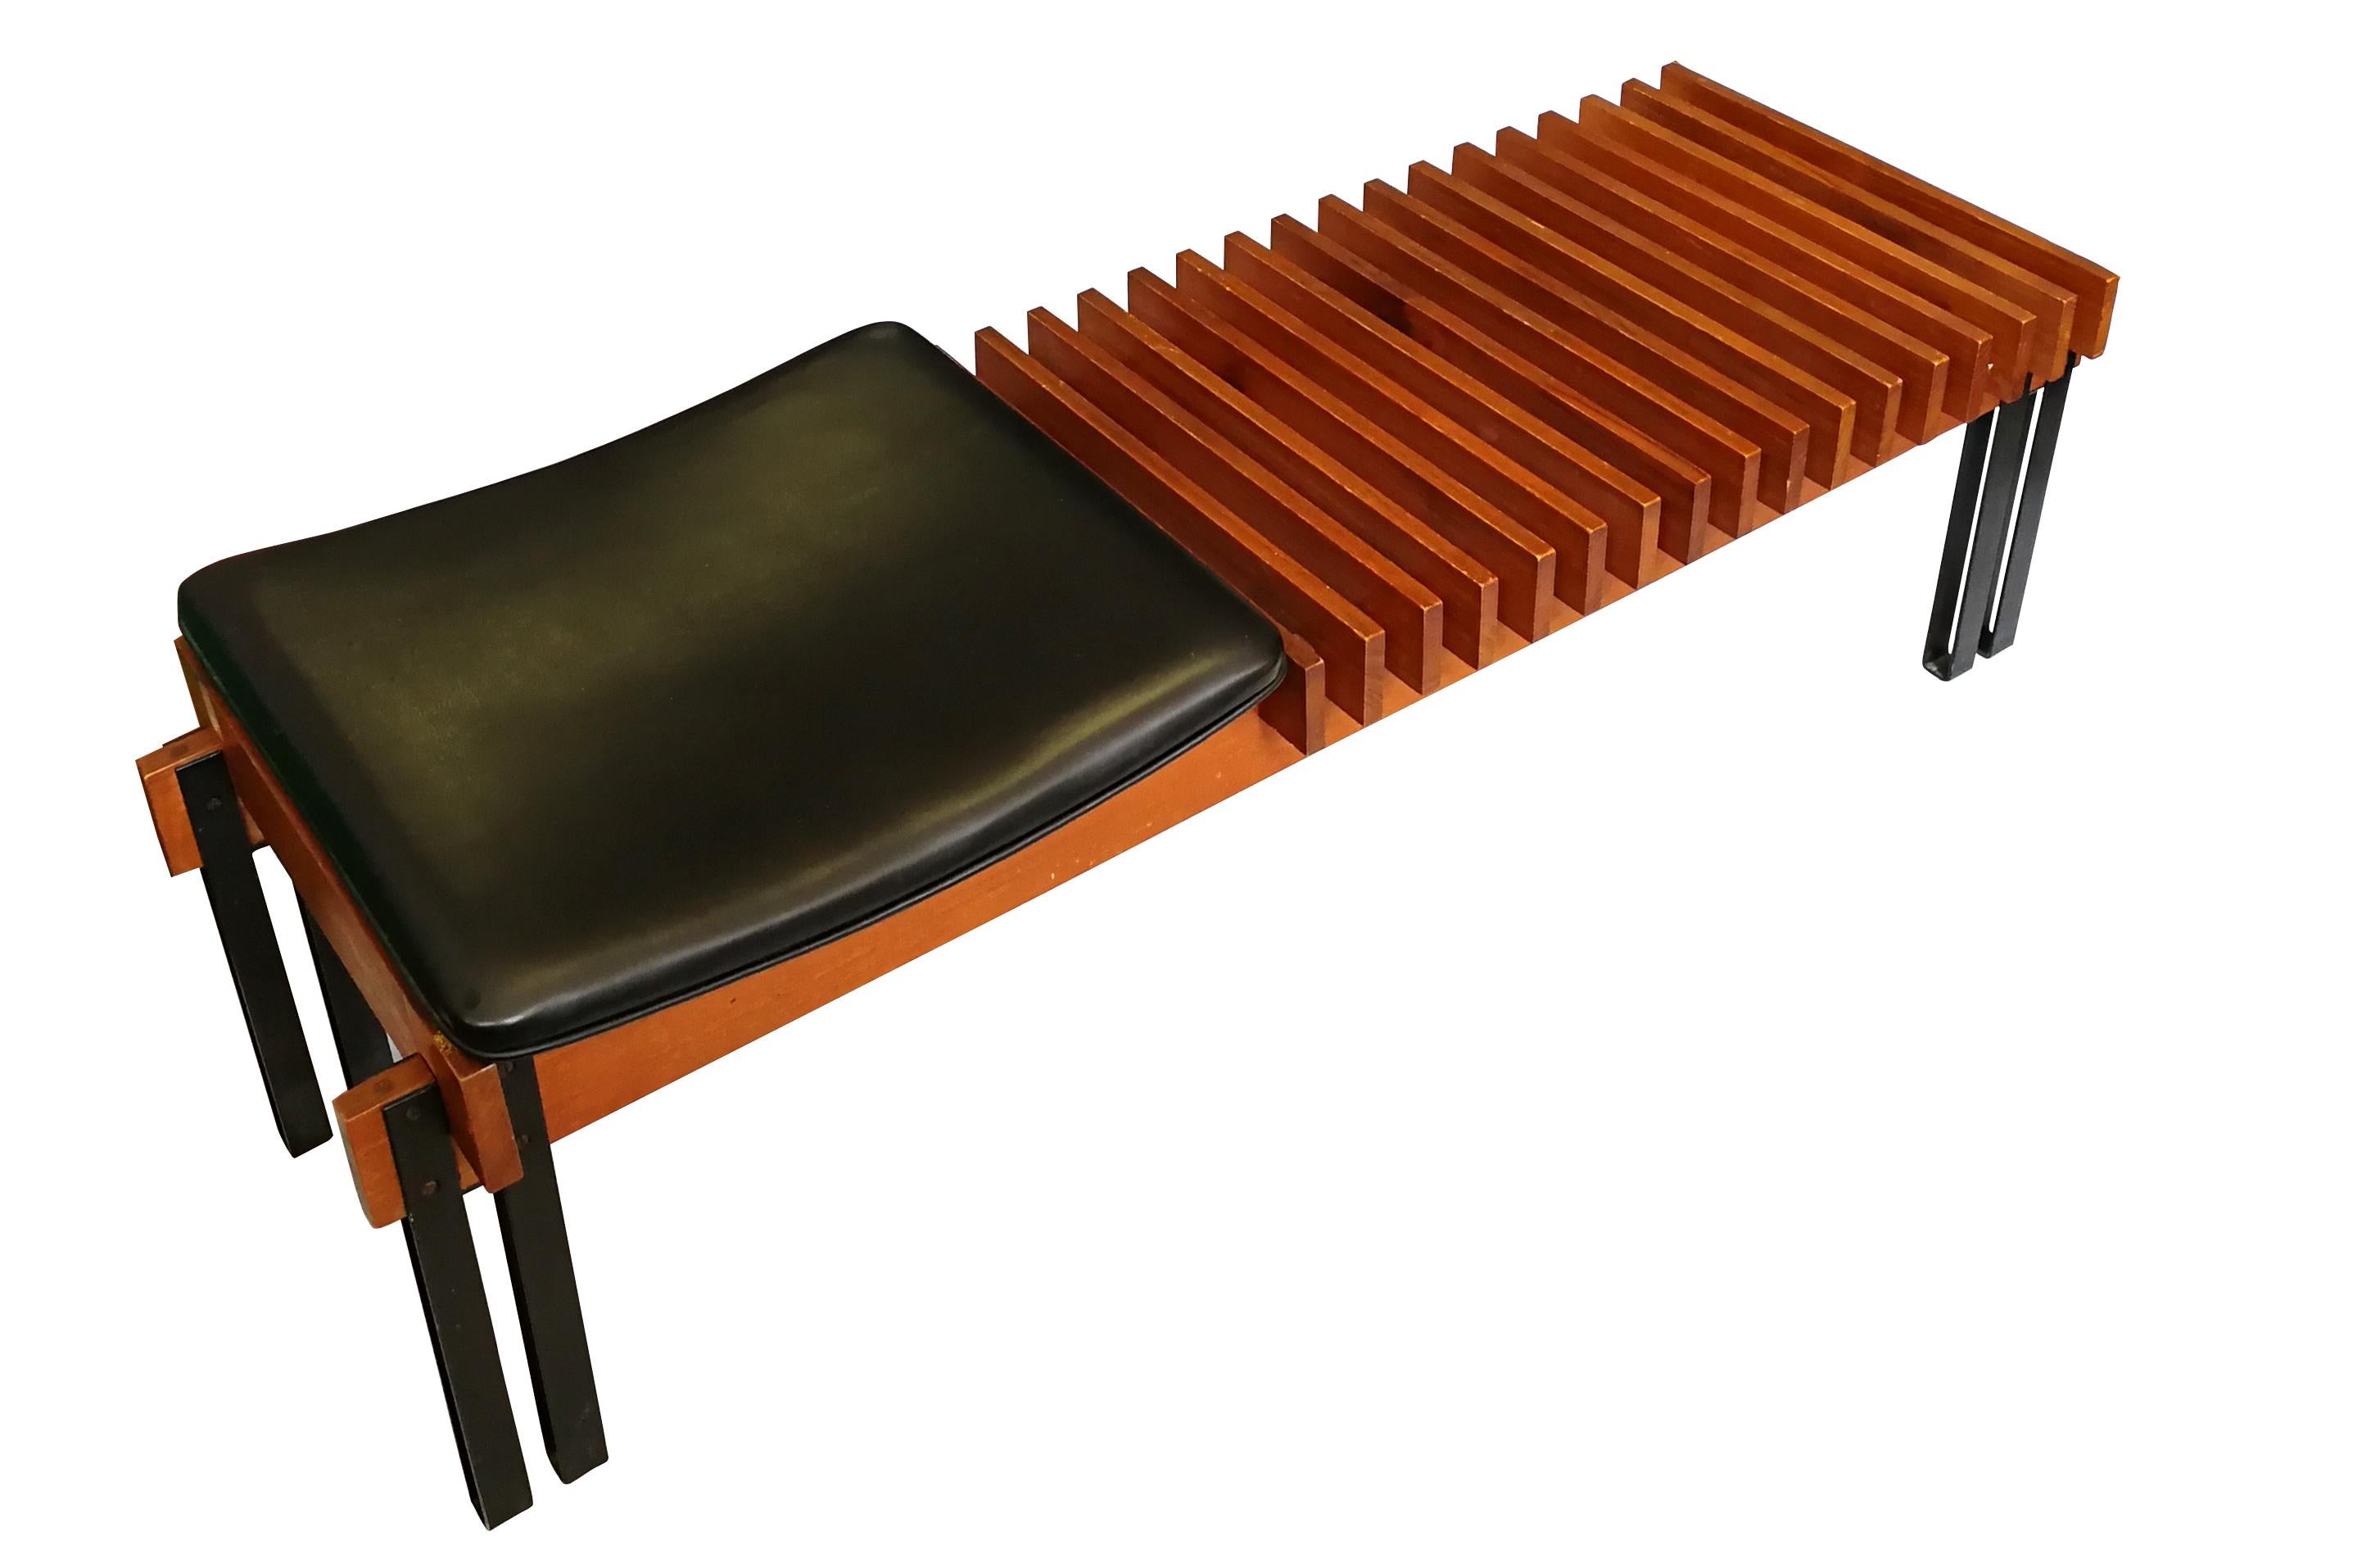 Vintage wood teak bench in lacquered metal, with pillow dressed in tiny imitation leather.
Very good conditions.